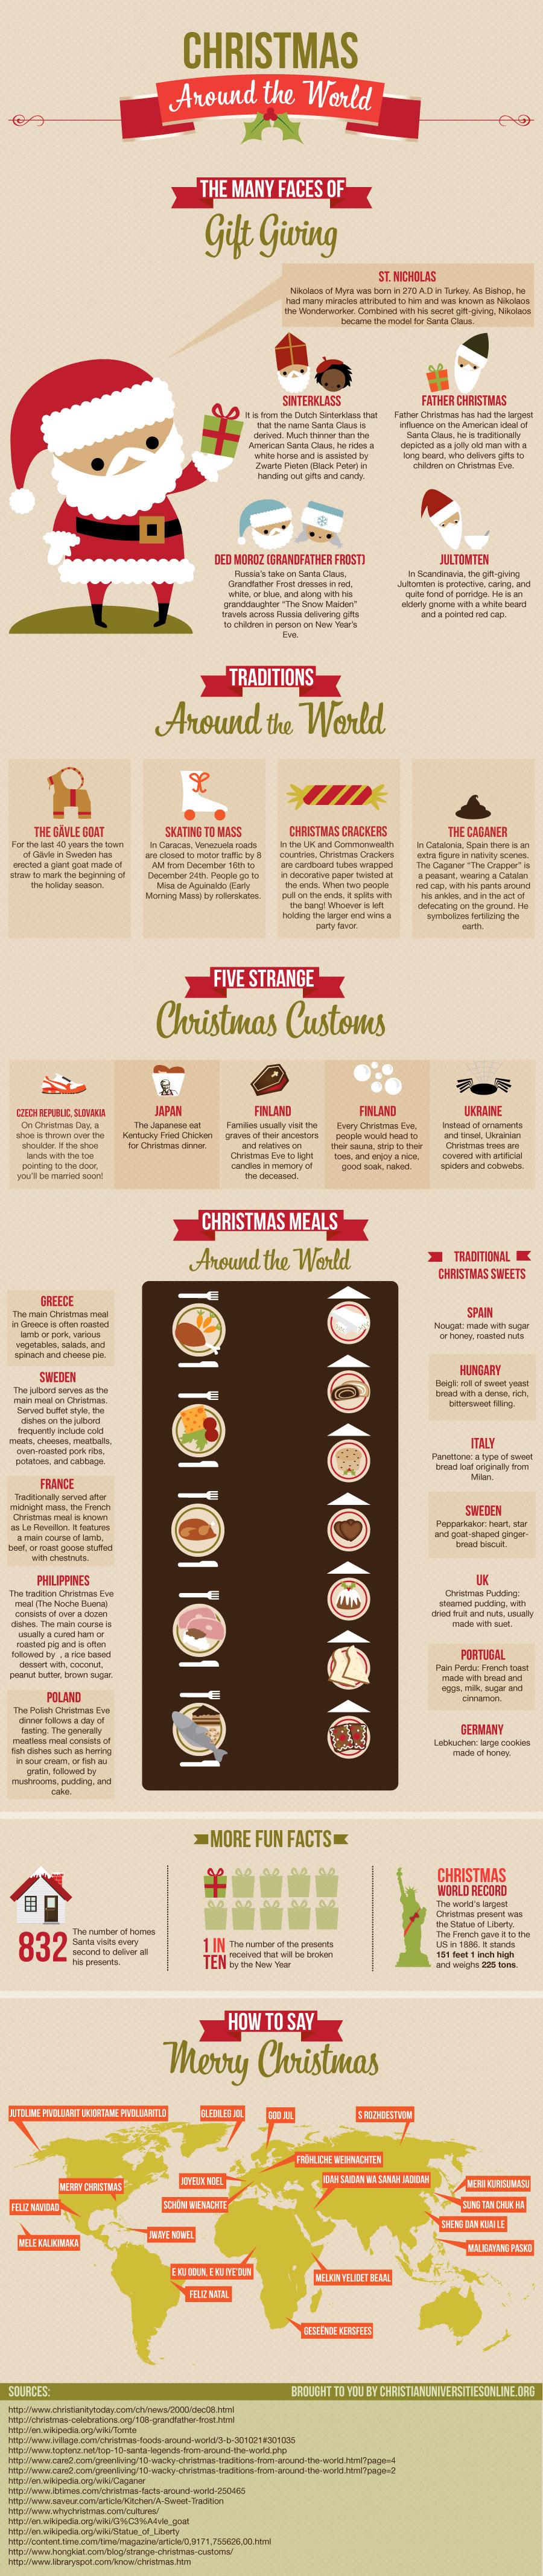 christmas-traditions-around-the-world_52add409e684c